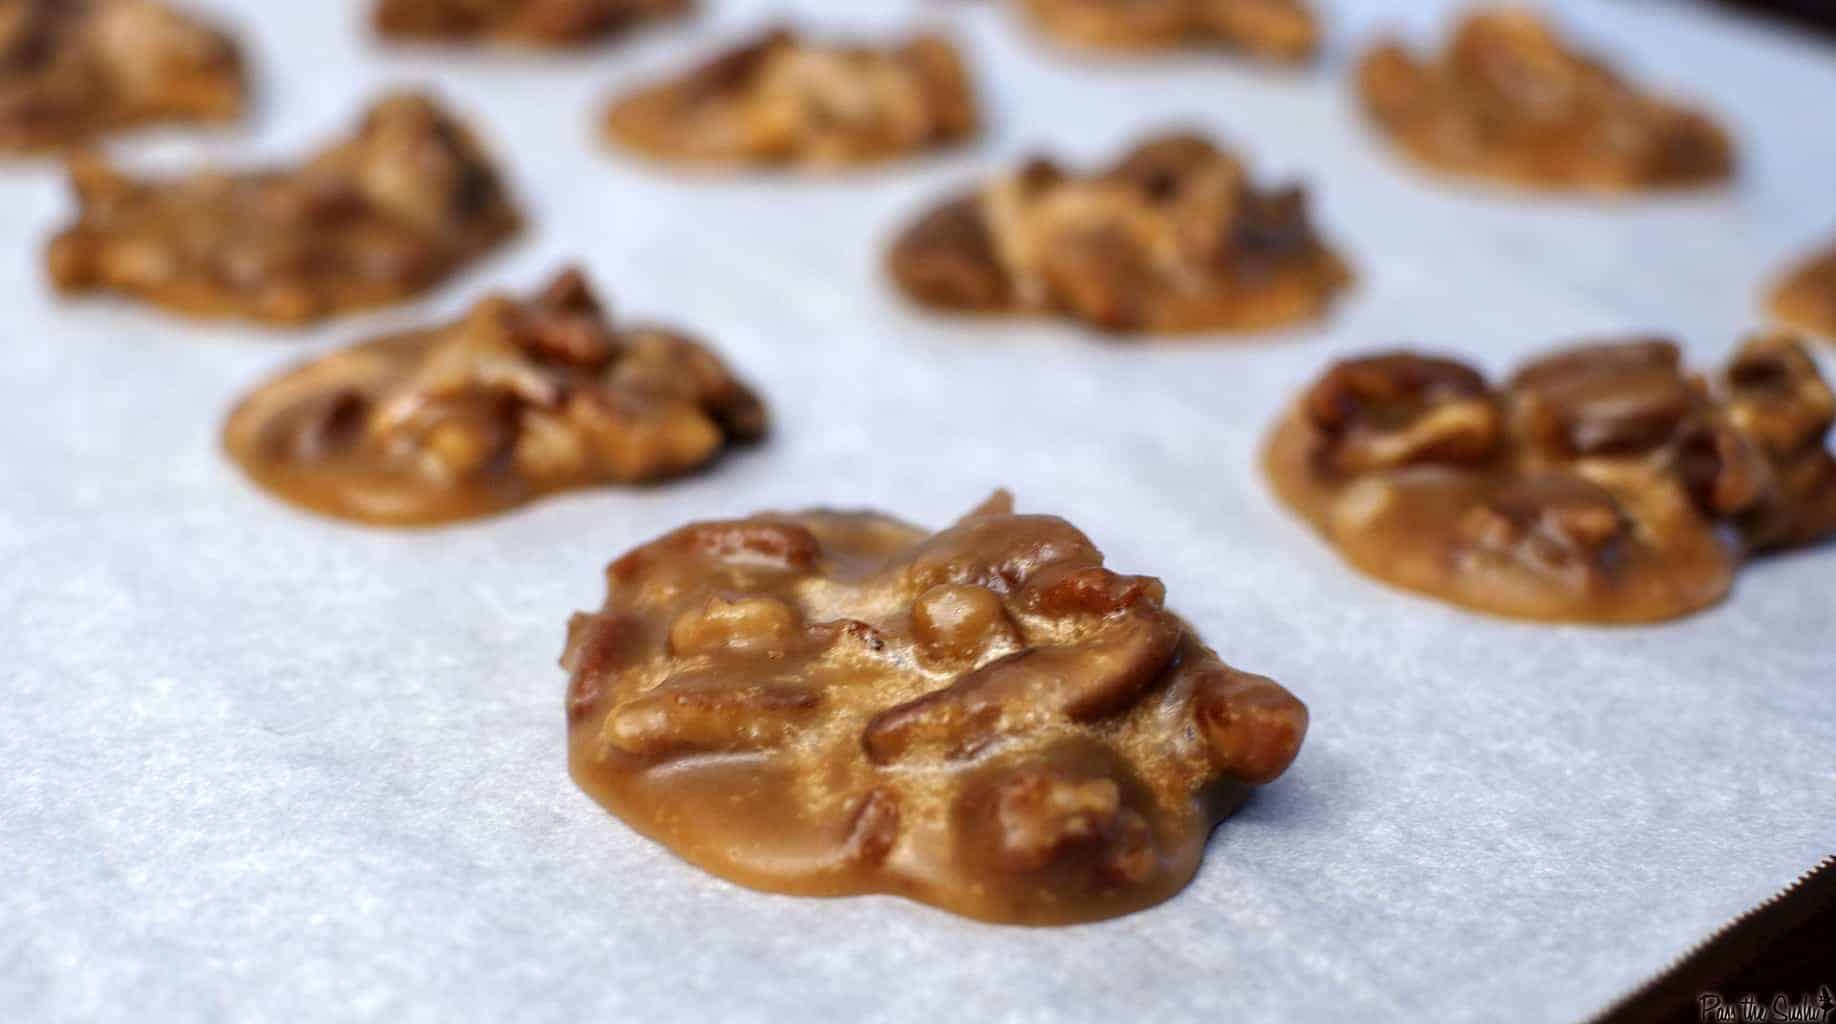 New Orleans bacon pralines are southern candy, made with lightly sweetened bacon and caramelized sugared pecans.They're a great holiday gift. Recipe's